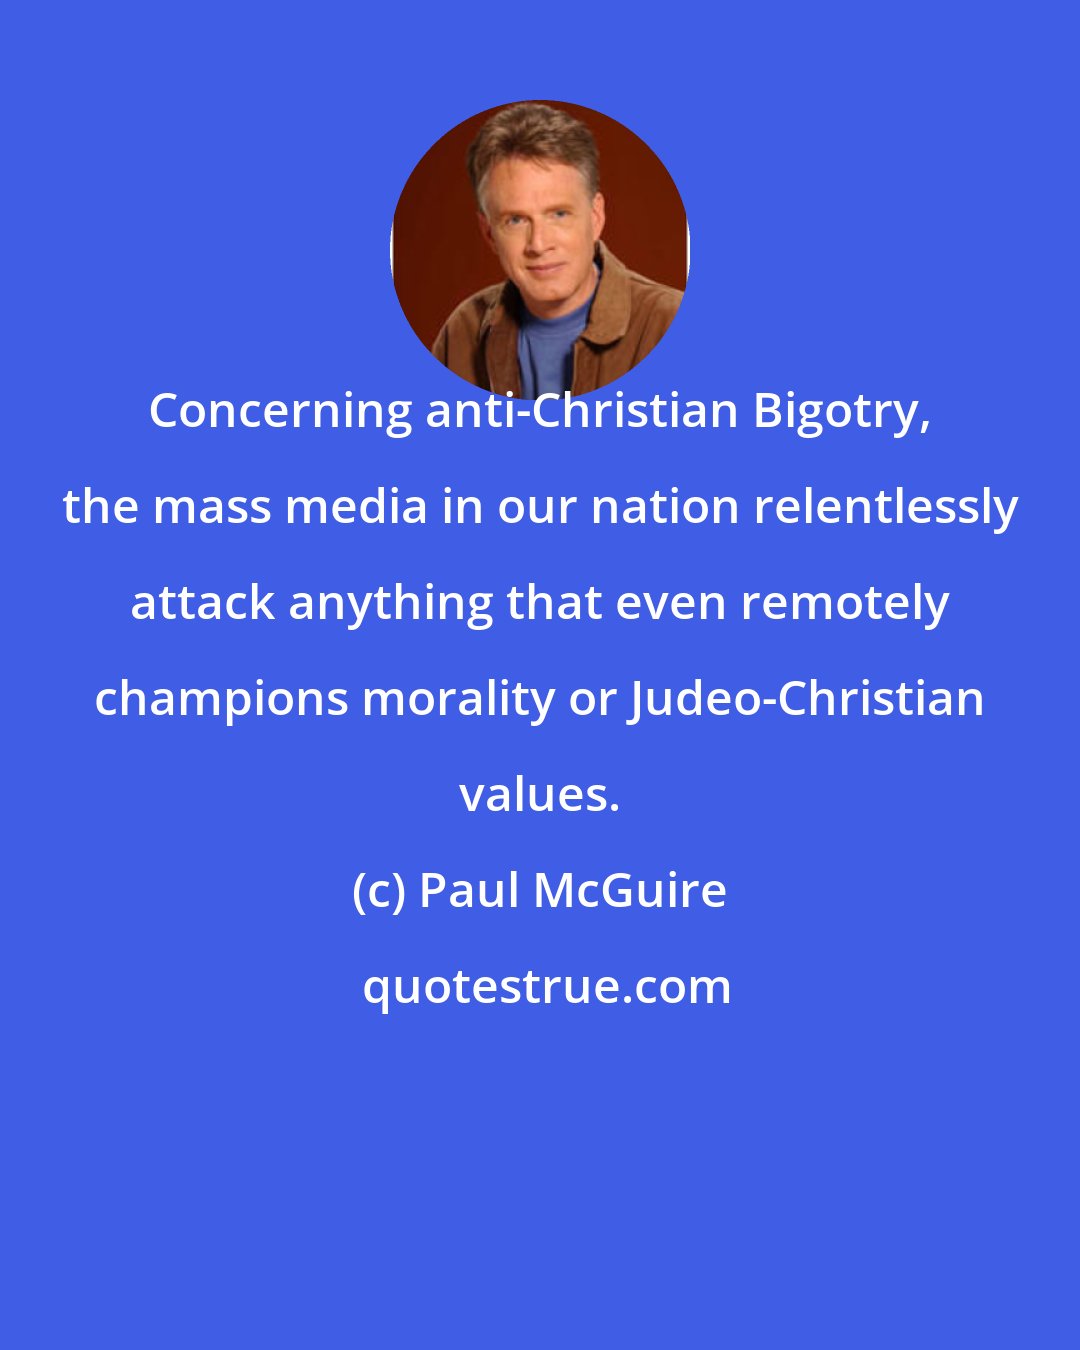 Paul McGuire: Concerning anti-Christian Bigotry, the mass media in our nation relentlessly attack anything that even remotely champions morality or Judeo-Christian values.